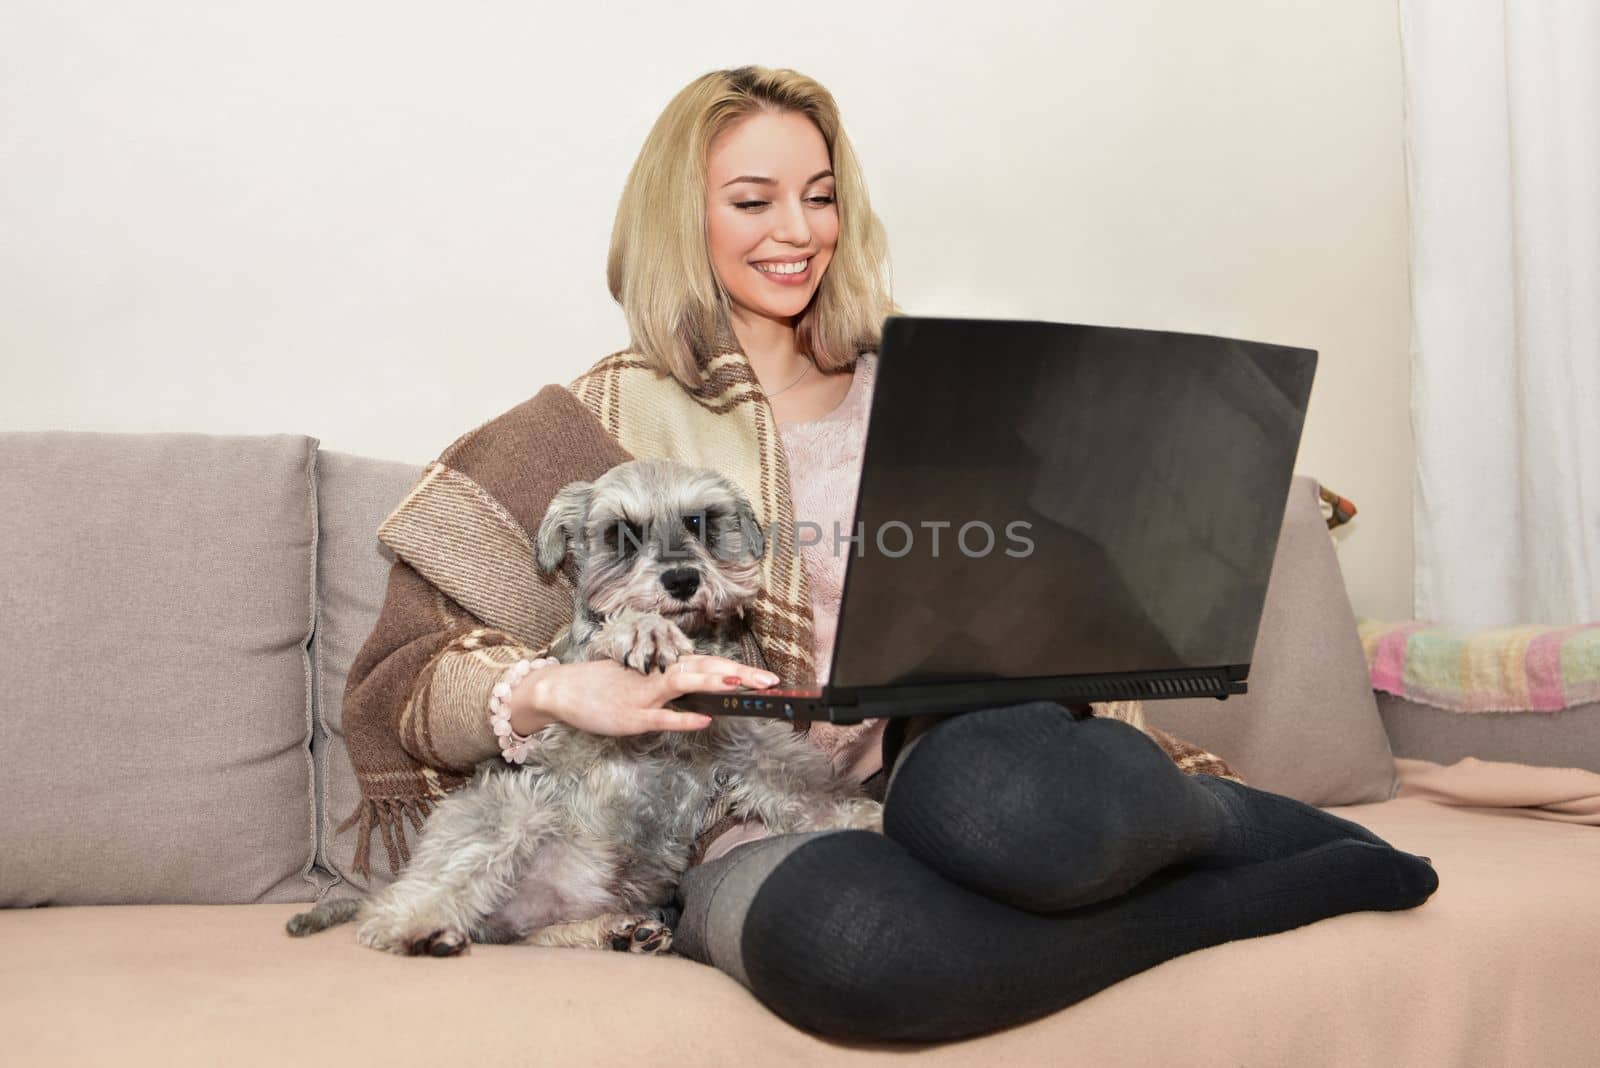 Lovely lady smiles and hugging a cute dog on the couch while watching movies on a laptop. by Nickstock